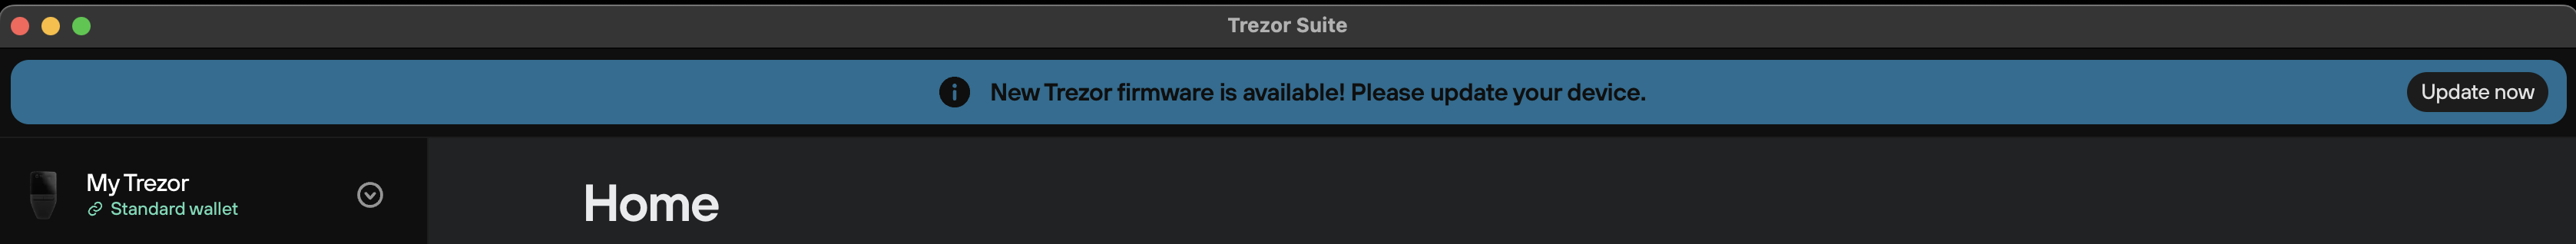 8 SIMPLE Steps to Update FIRMWARE on your Trezor Wallet – DollarSince: Crypto Assets Know-How